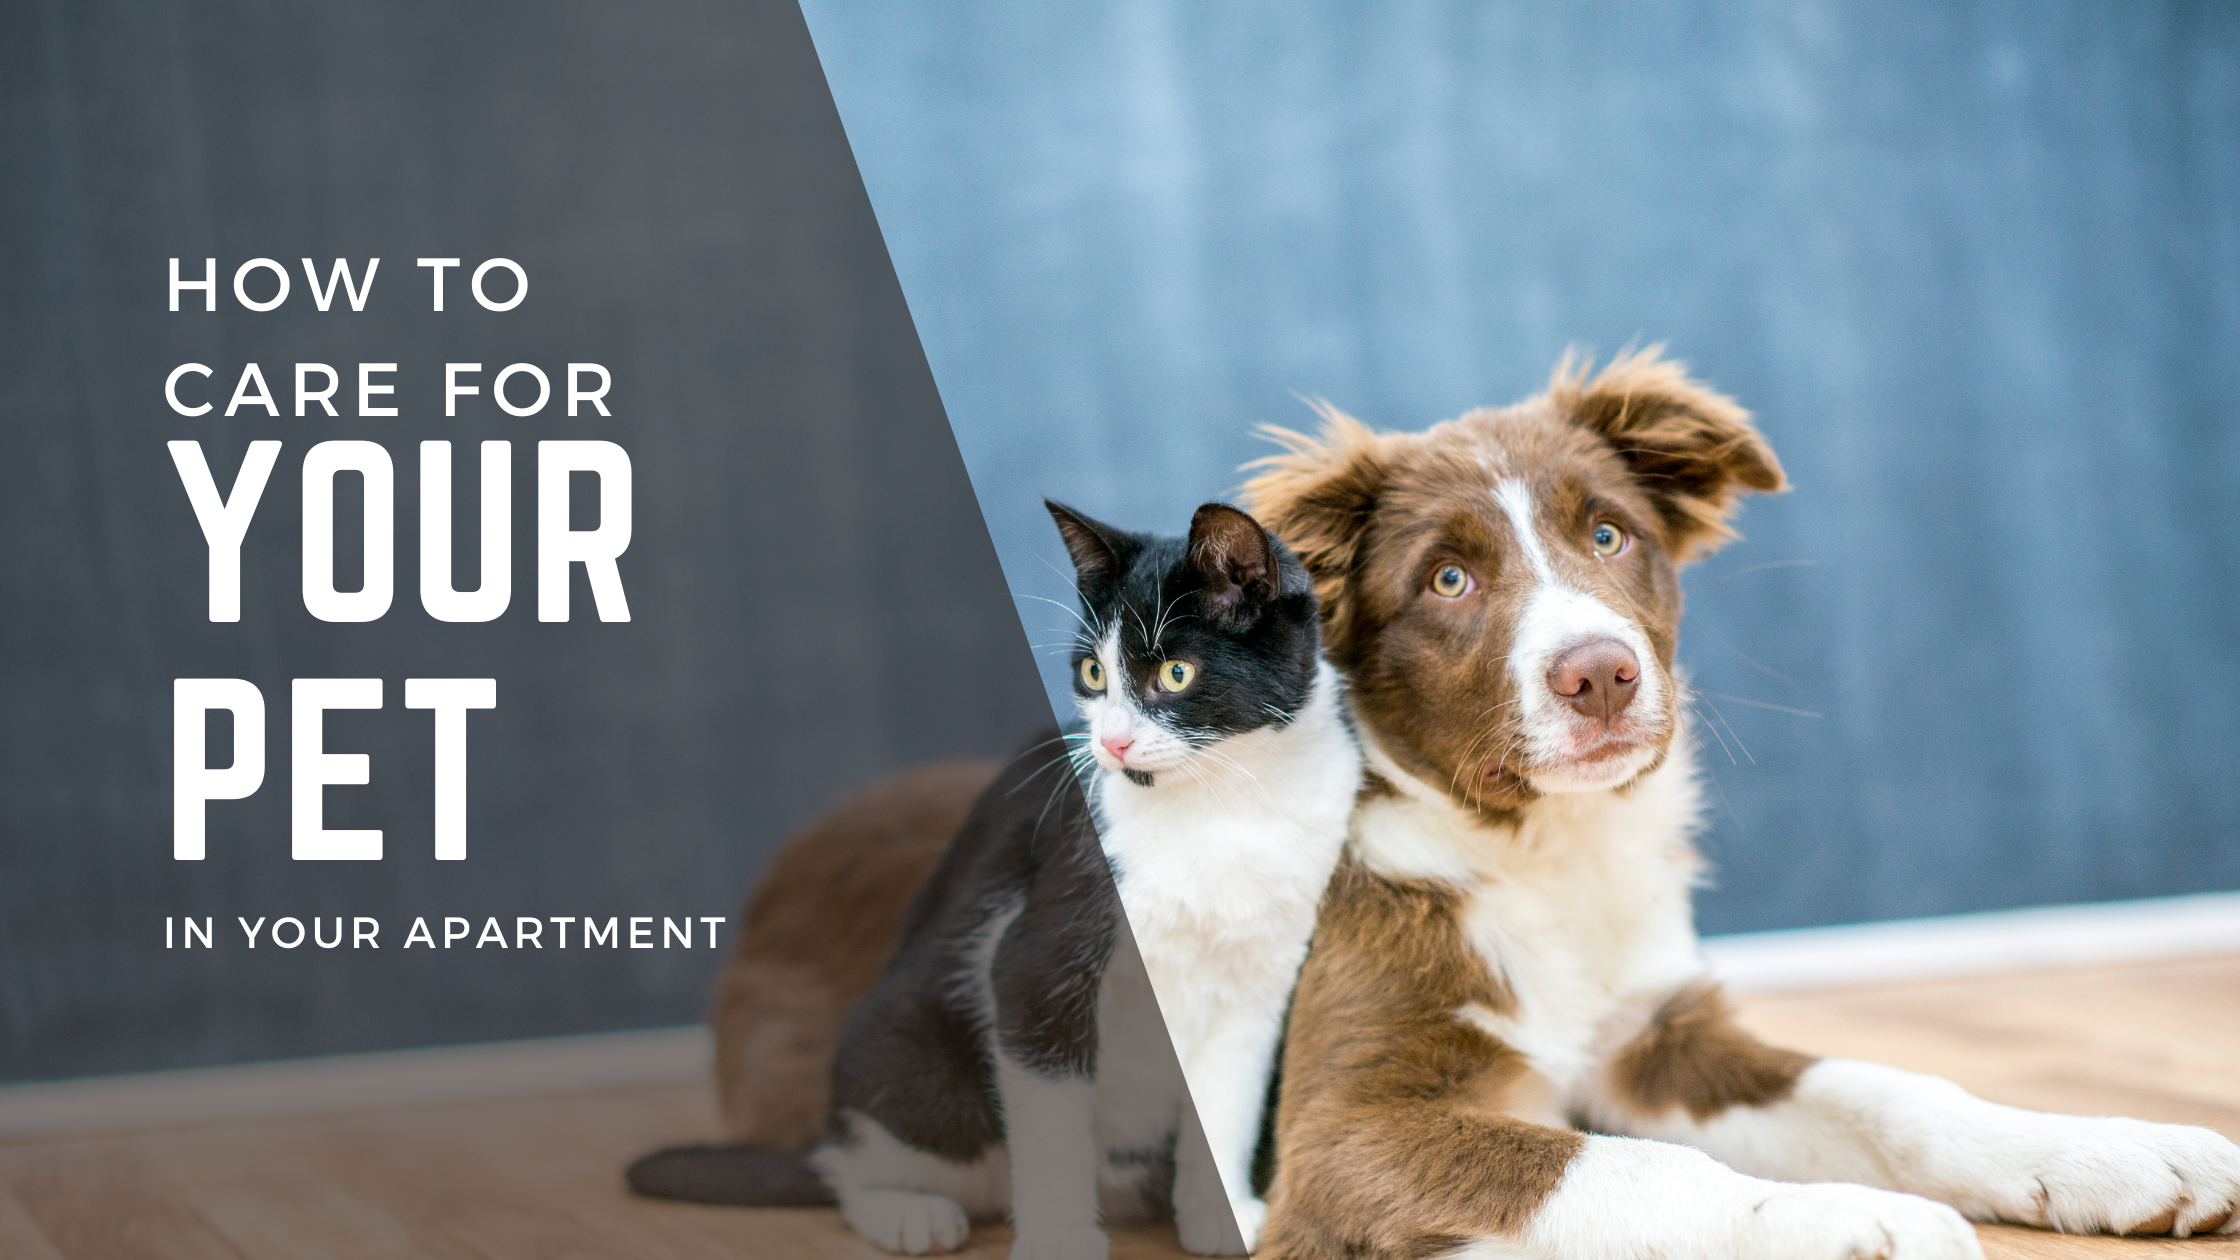 How to Care For Your Pet In Your Apartment